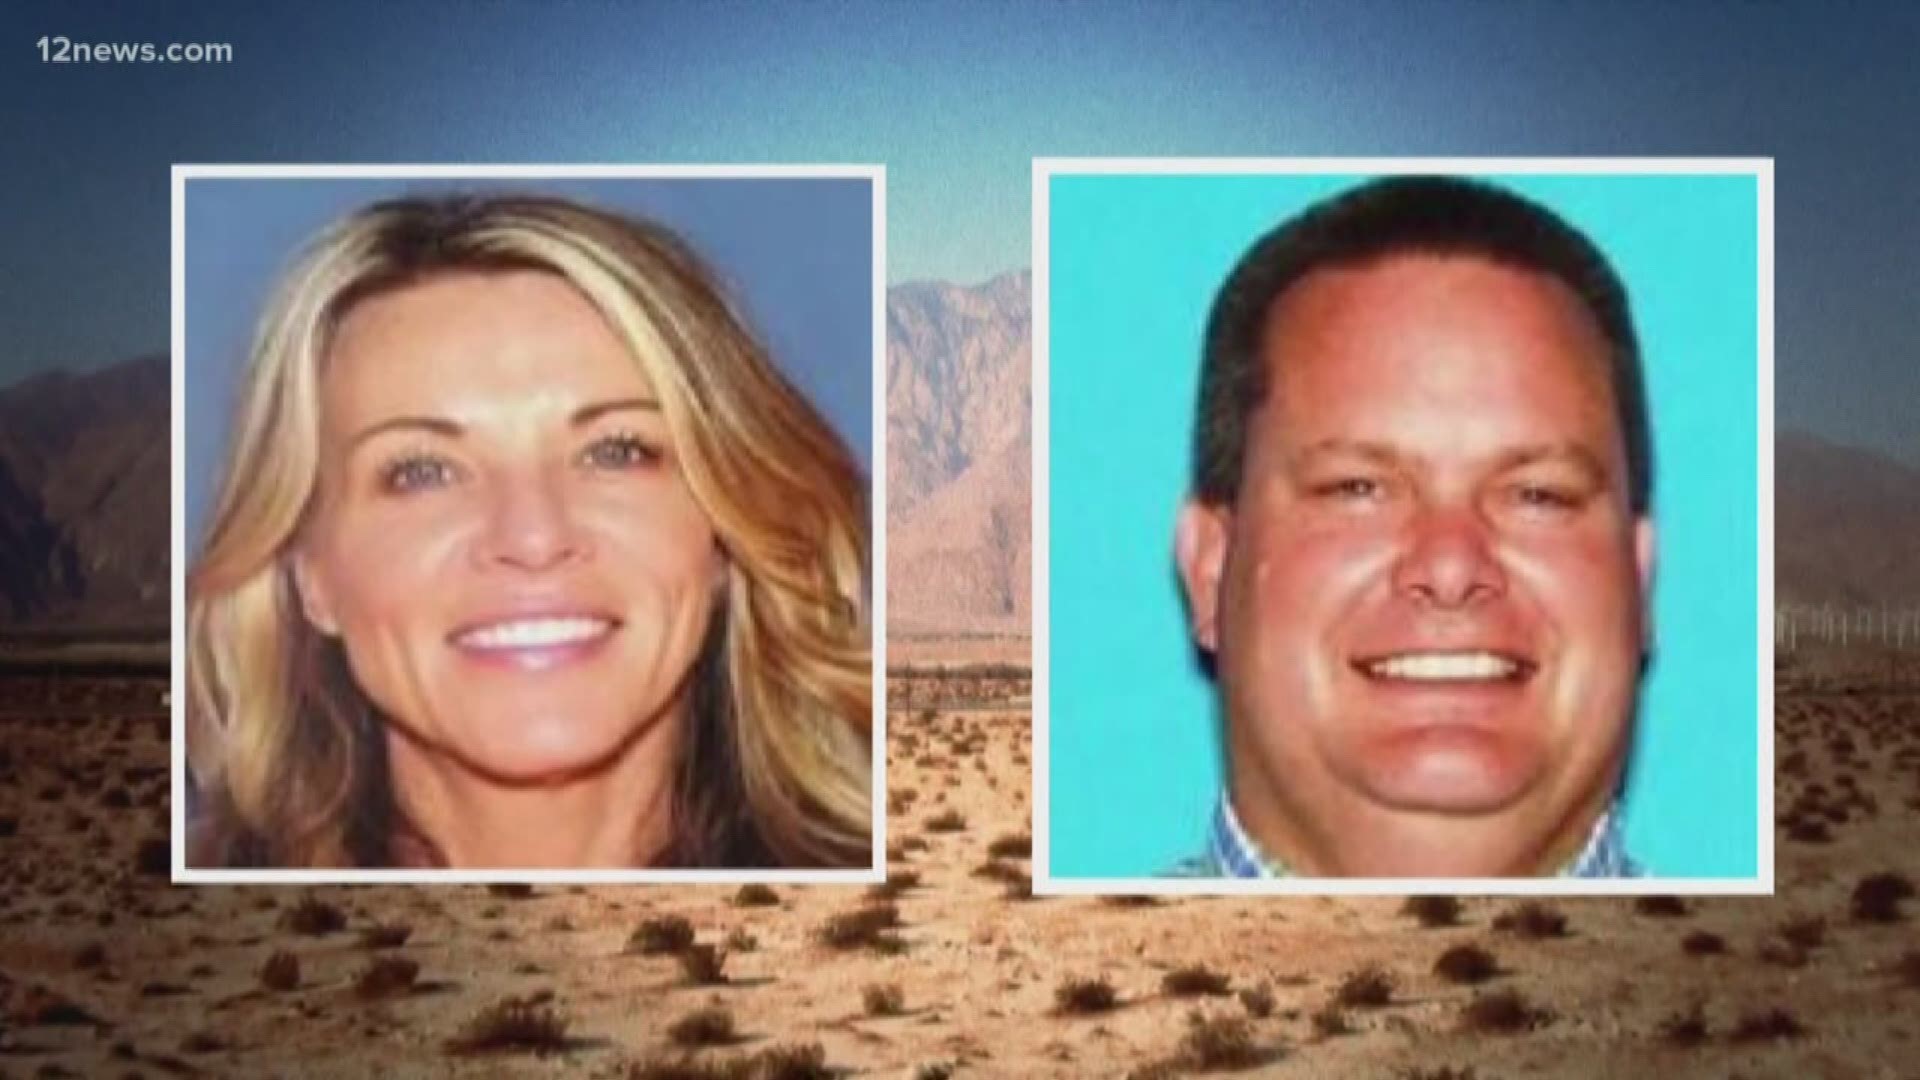 Investigators across the western U.S. are working on finding these JJ Vallow and Tylee Ryan, but the story really started to unravel in Chandler, Arizona.